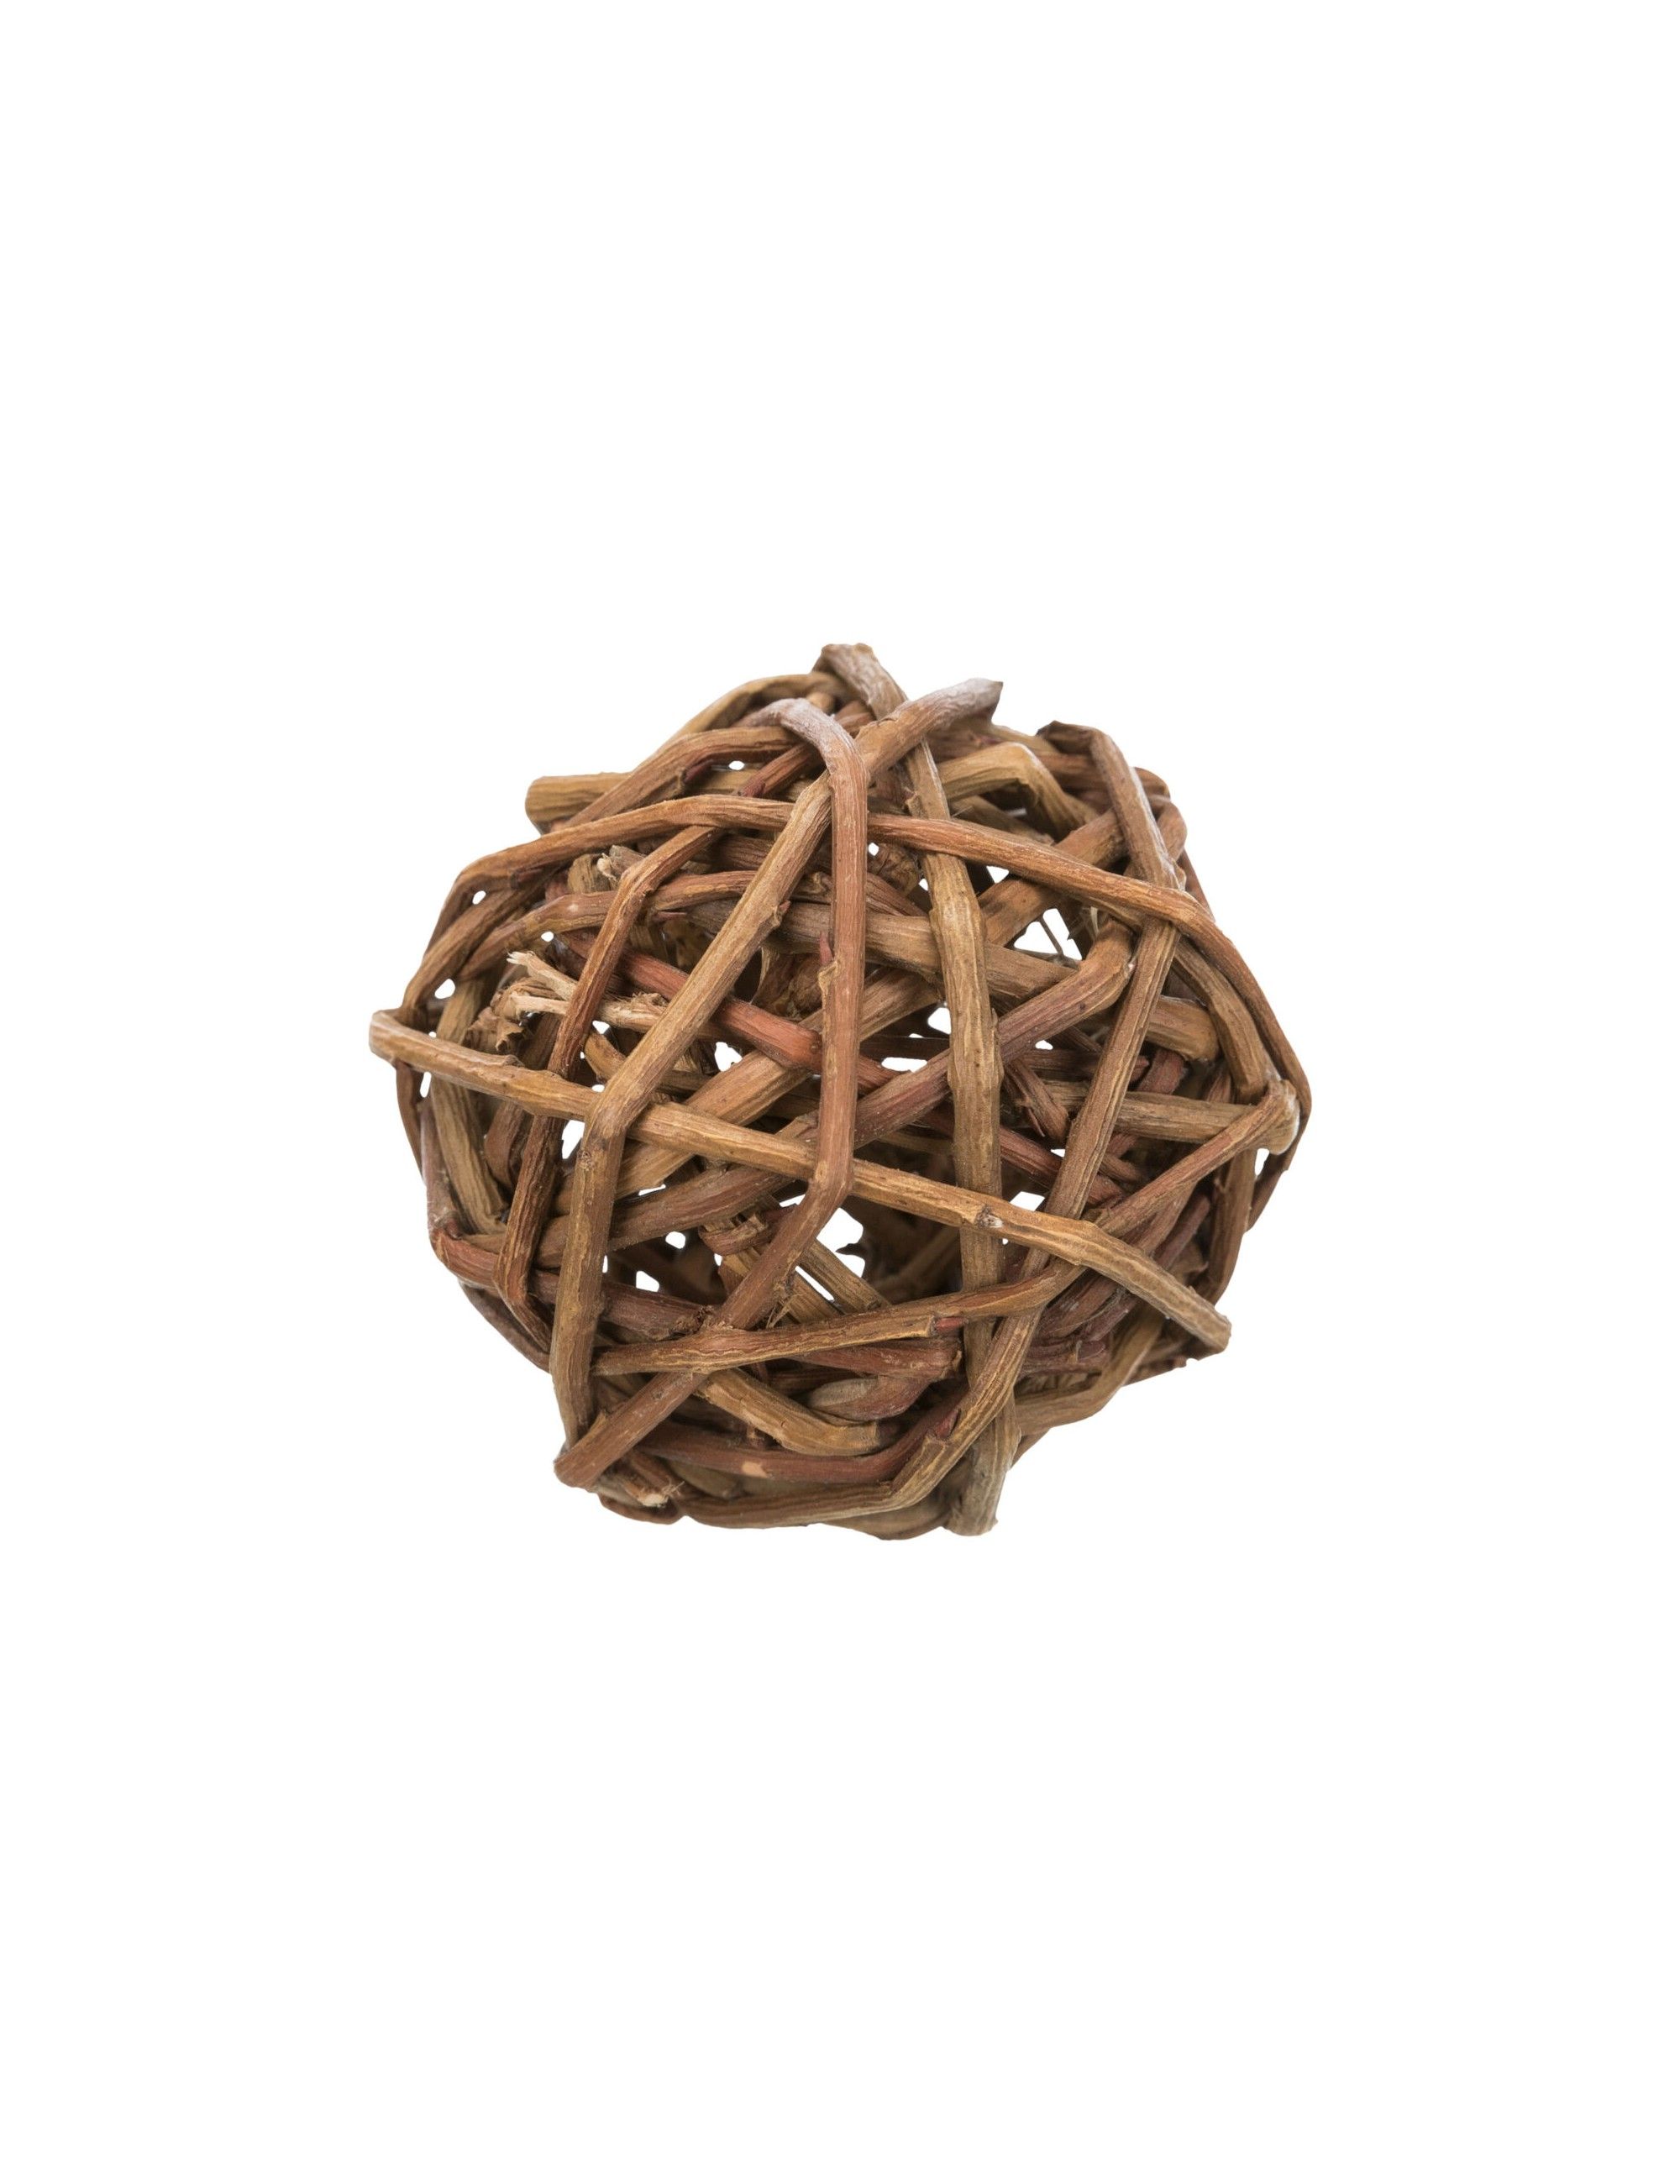 TRIXIE - Wicker Ball with Bell - 3 Sizes to choose from